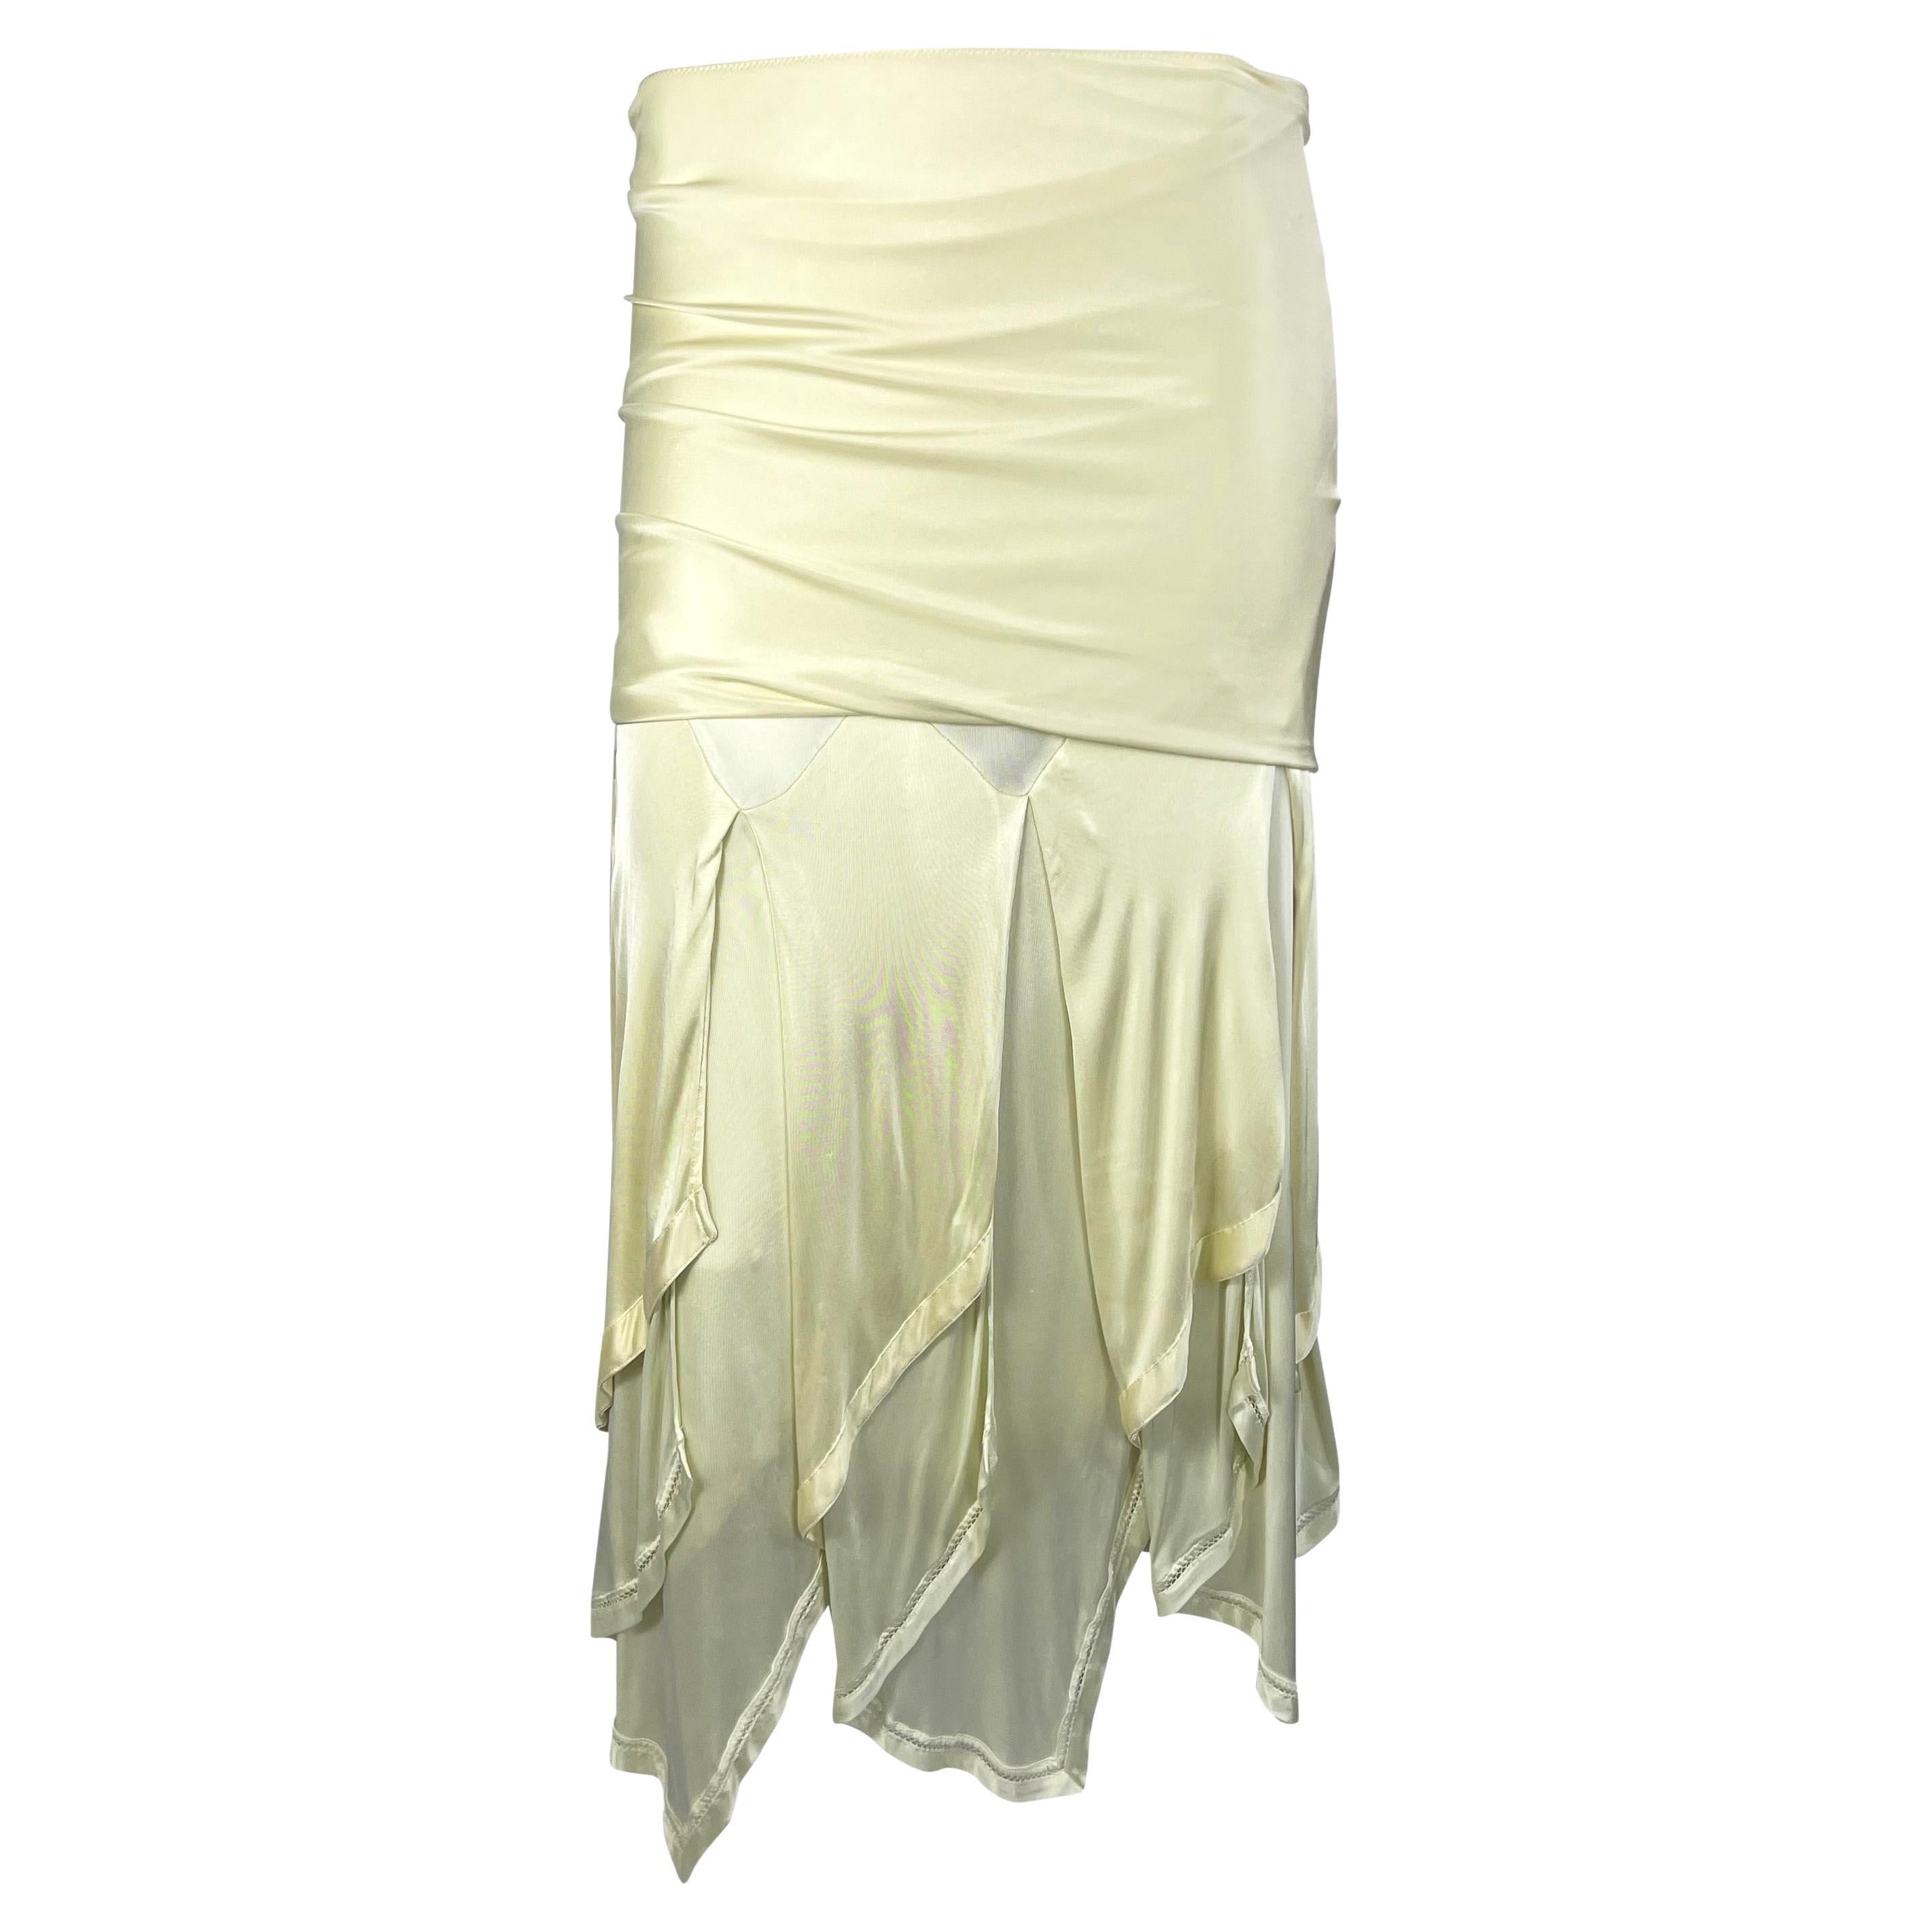 S/S 2004 Yves Saint Laurent by Tom Ford Runway Off-White Stretch Ruffle Skirt For Sale